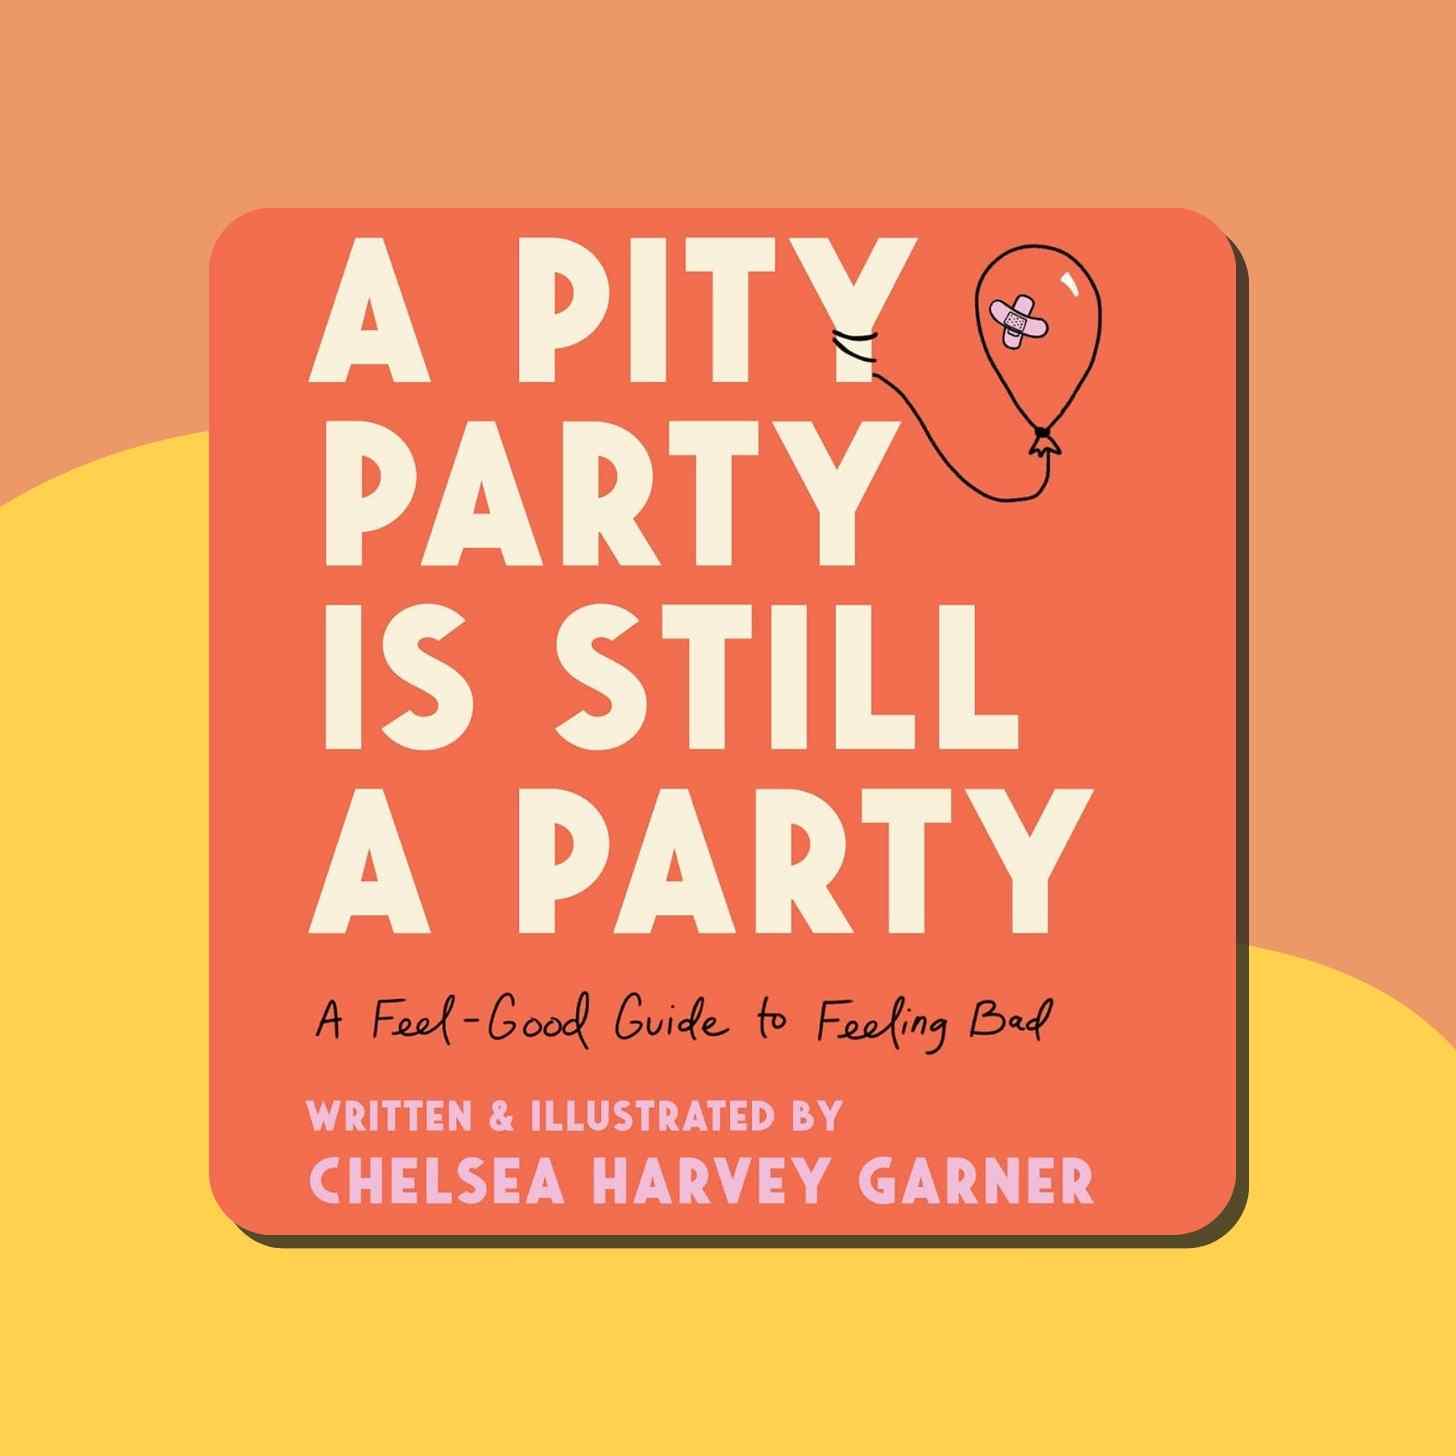 The Book Cover For "A PityParty Is Still A Party" By Chelsea Harvey Garner